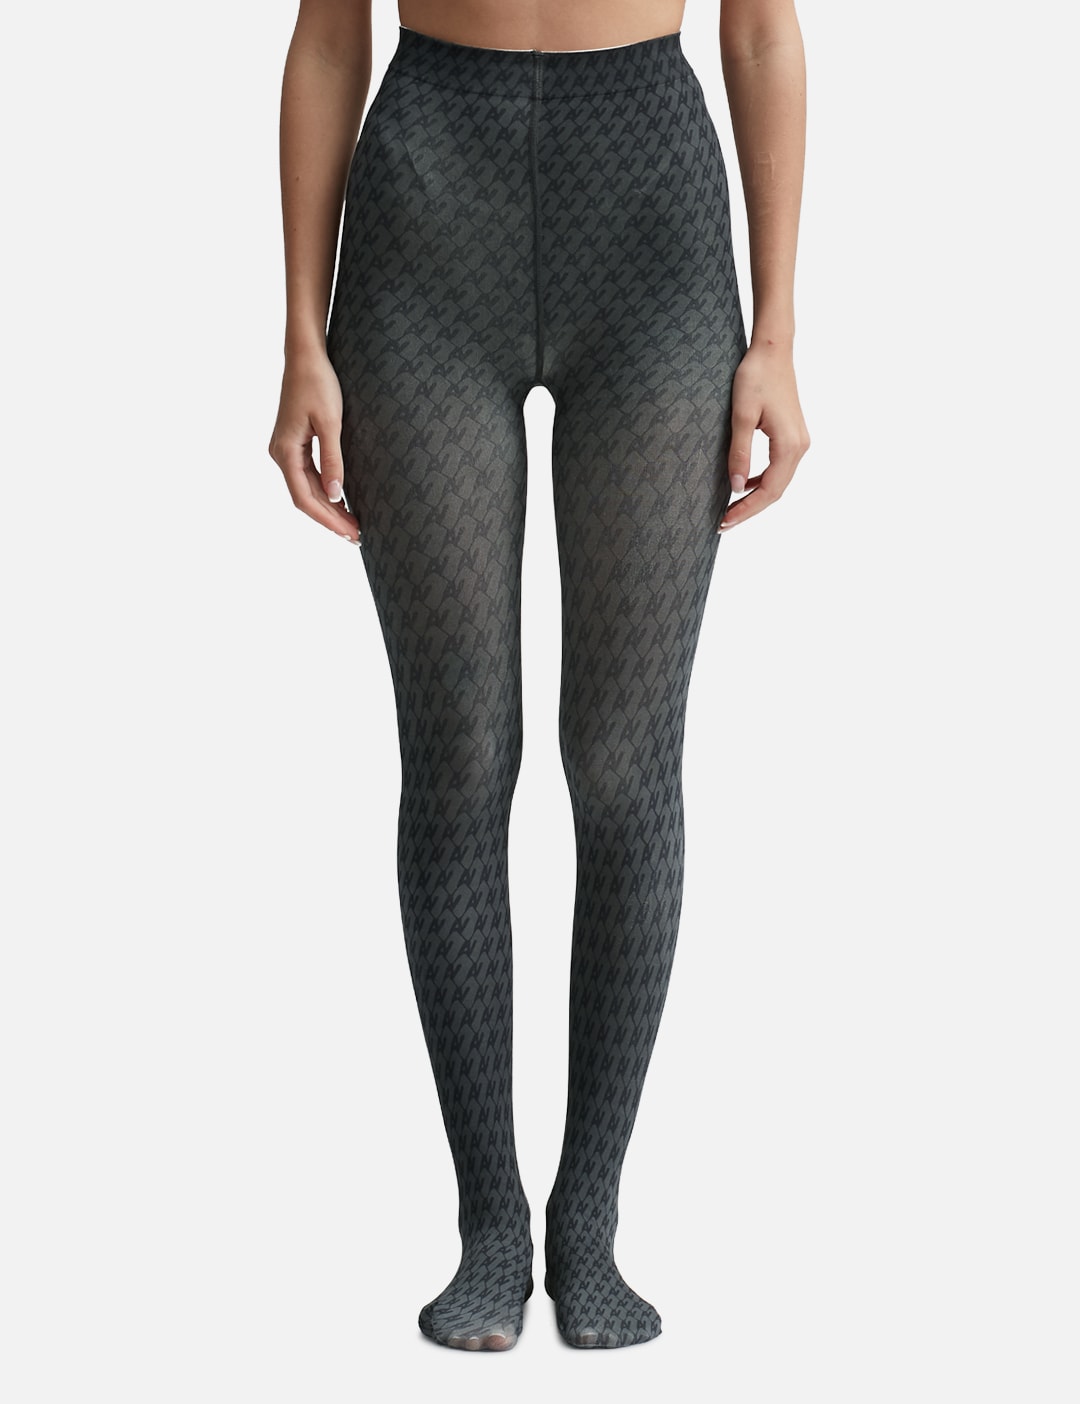 The G G Tights